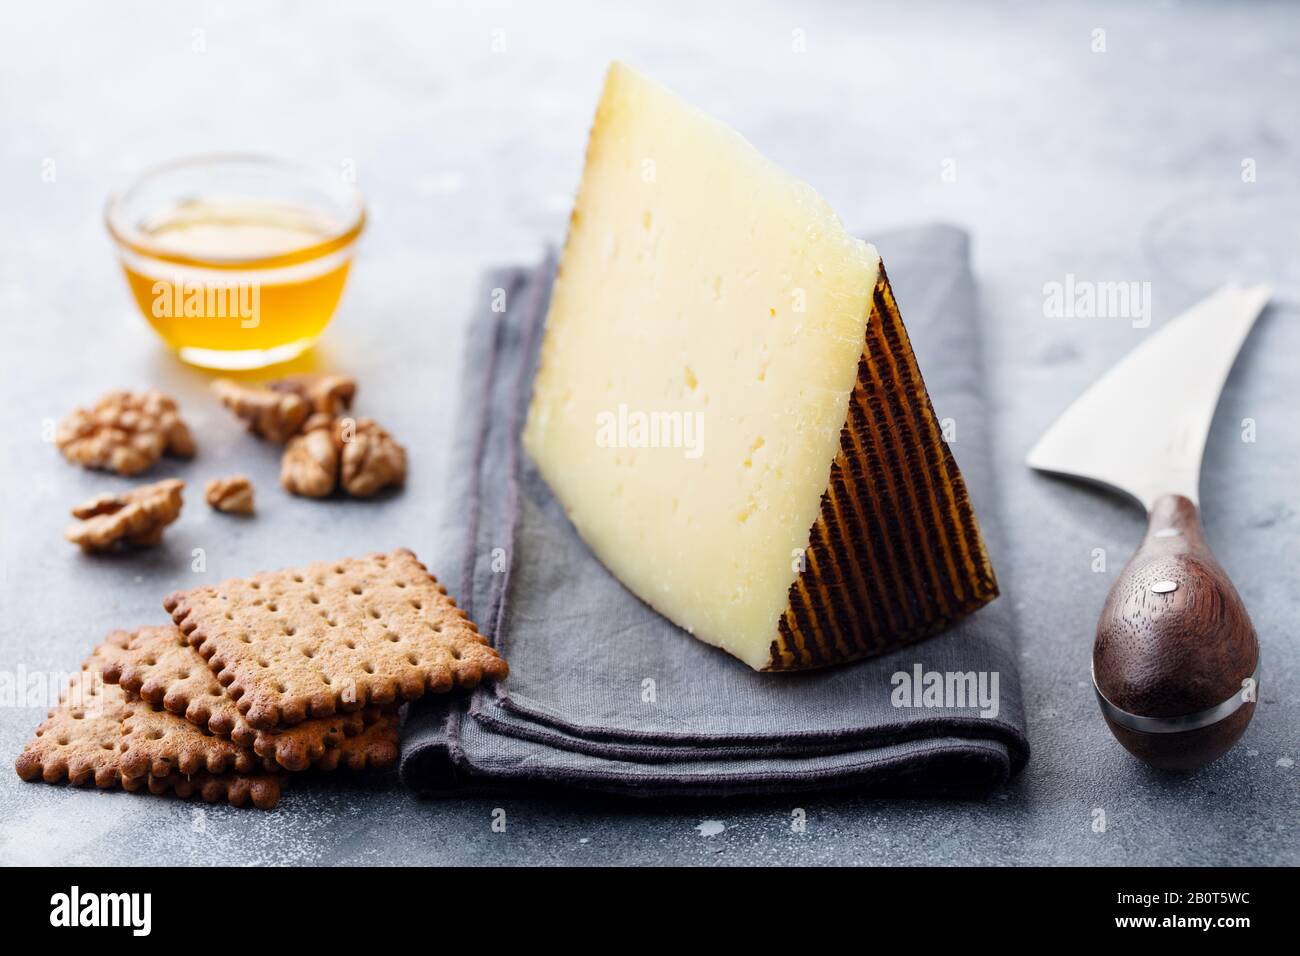 Hard cheese, Manchego with nuts, honey and crackers on grey background. Close up. Stock Photo